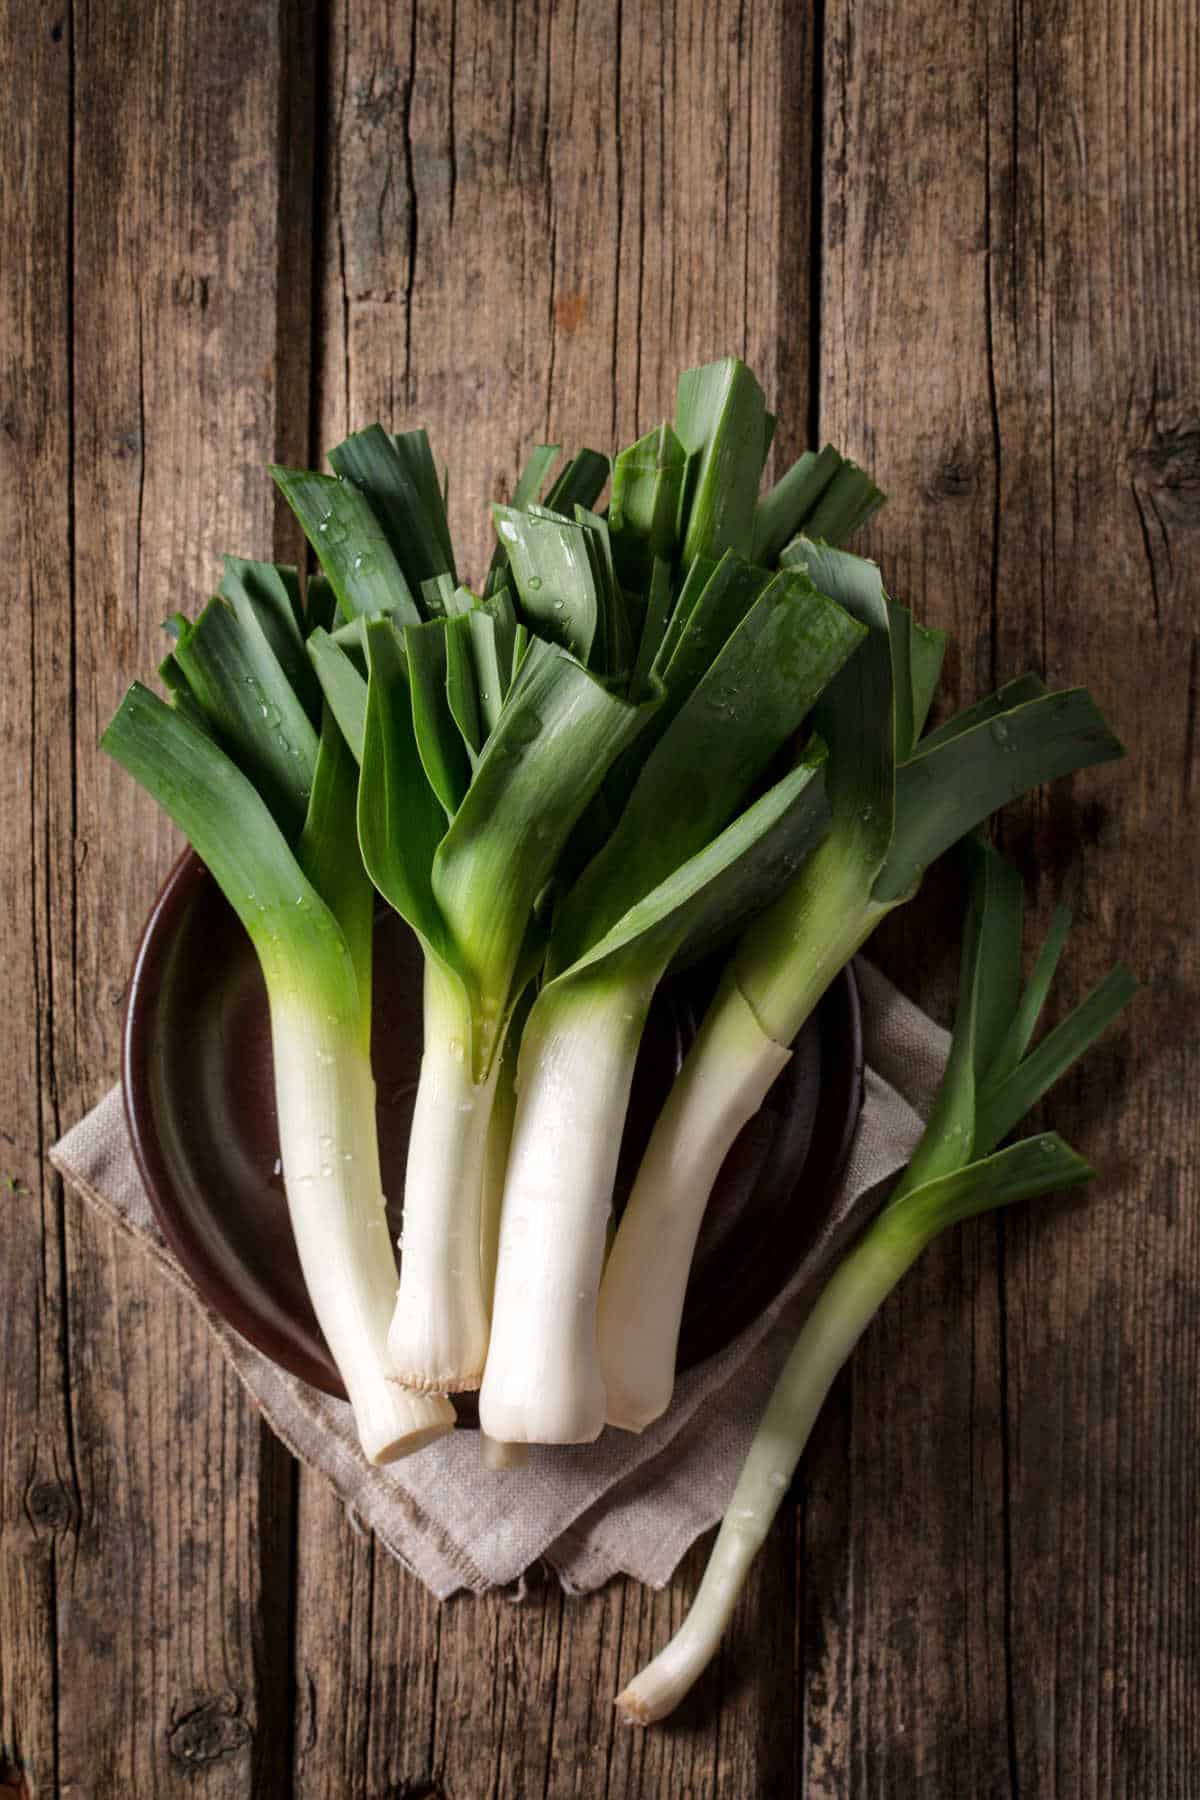 Leeks on a wooden table.